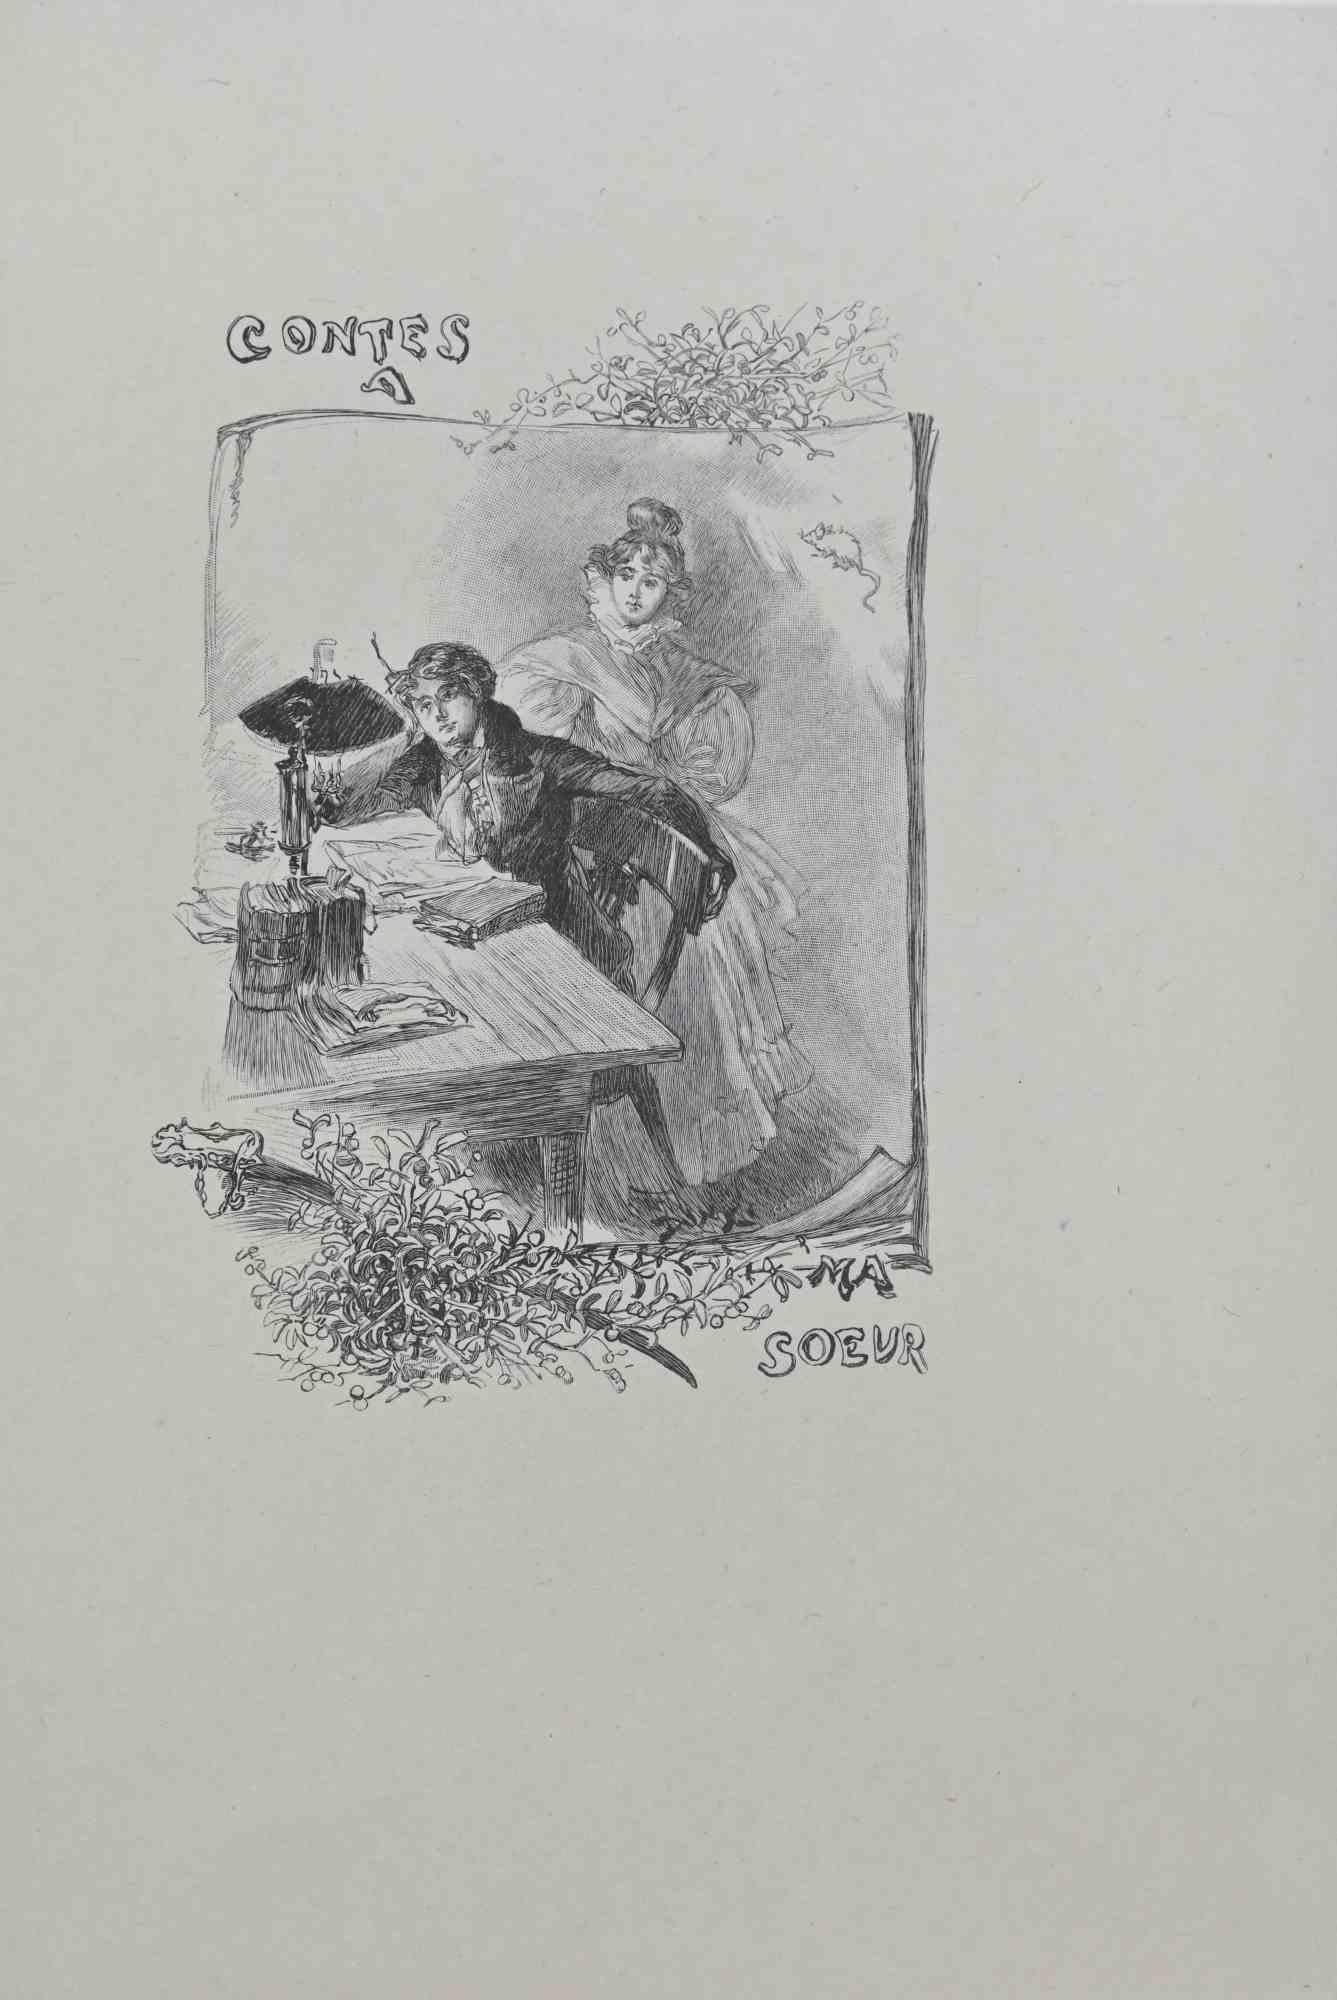 Contes a Ma Soeur is a Lithograph on paper realized by Hégésippe Moreau in 1838.

The artwork is in good condition.

Hégésippe Moreau (1810-1838) was a French lyric poet. The romantic myth was solidified by the publication of his complete